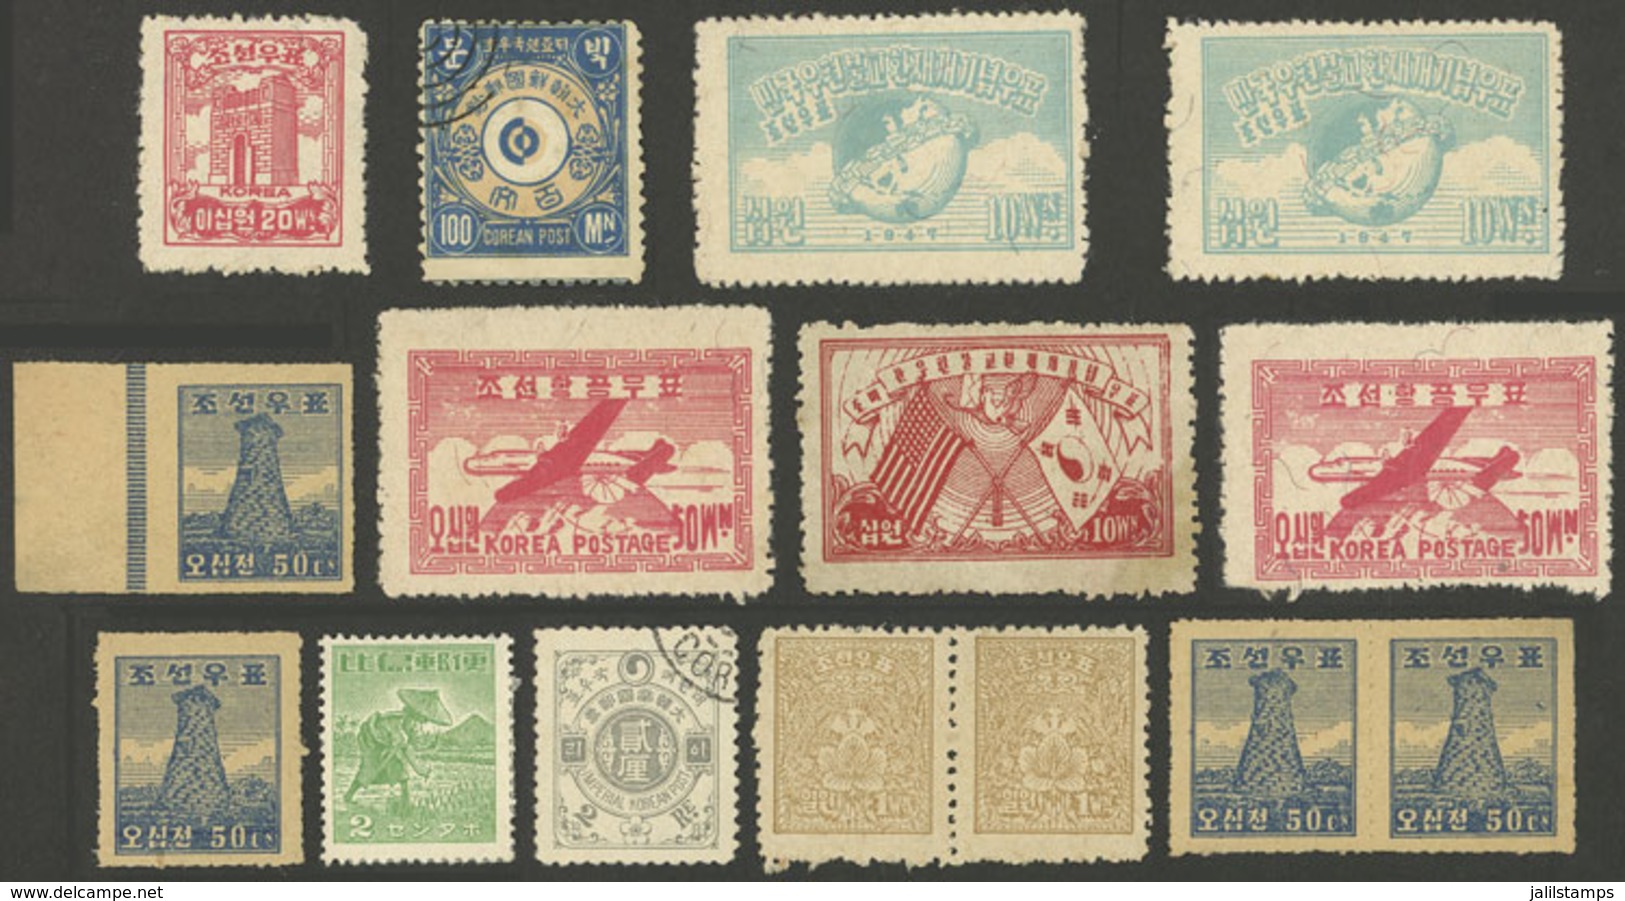 KOREA: Small Lot Of Varied Stamps, Almost All Of Very Fine Quality (several MNH), Low Start! - Korea (...-1945)